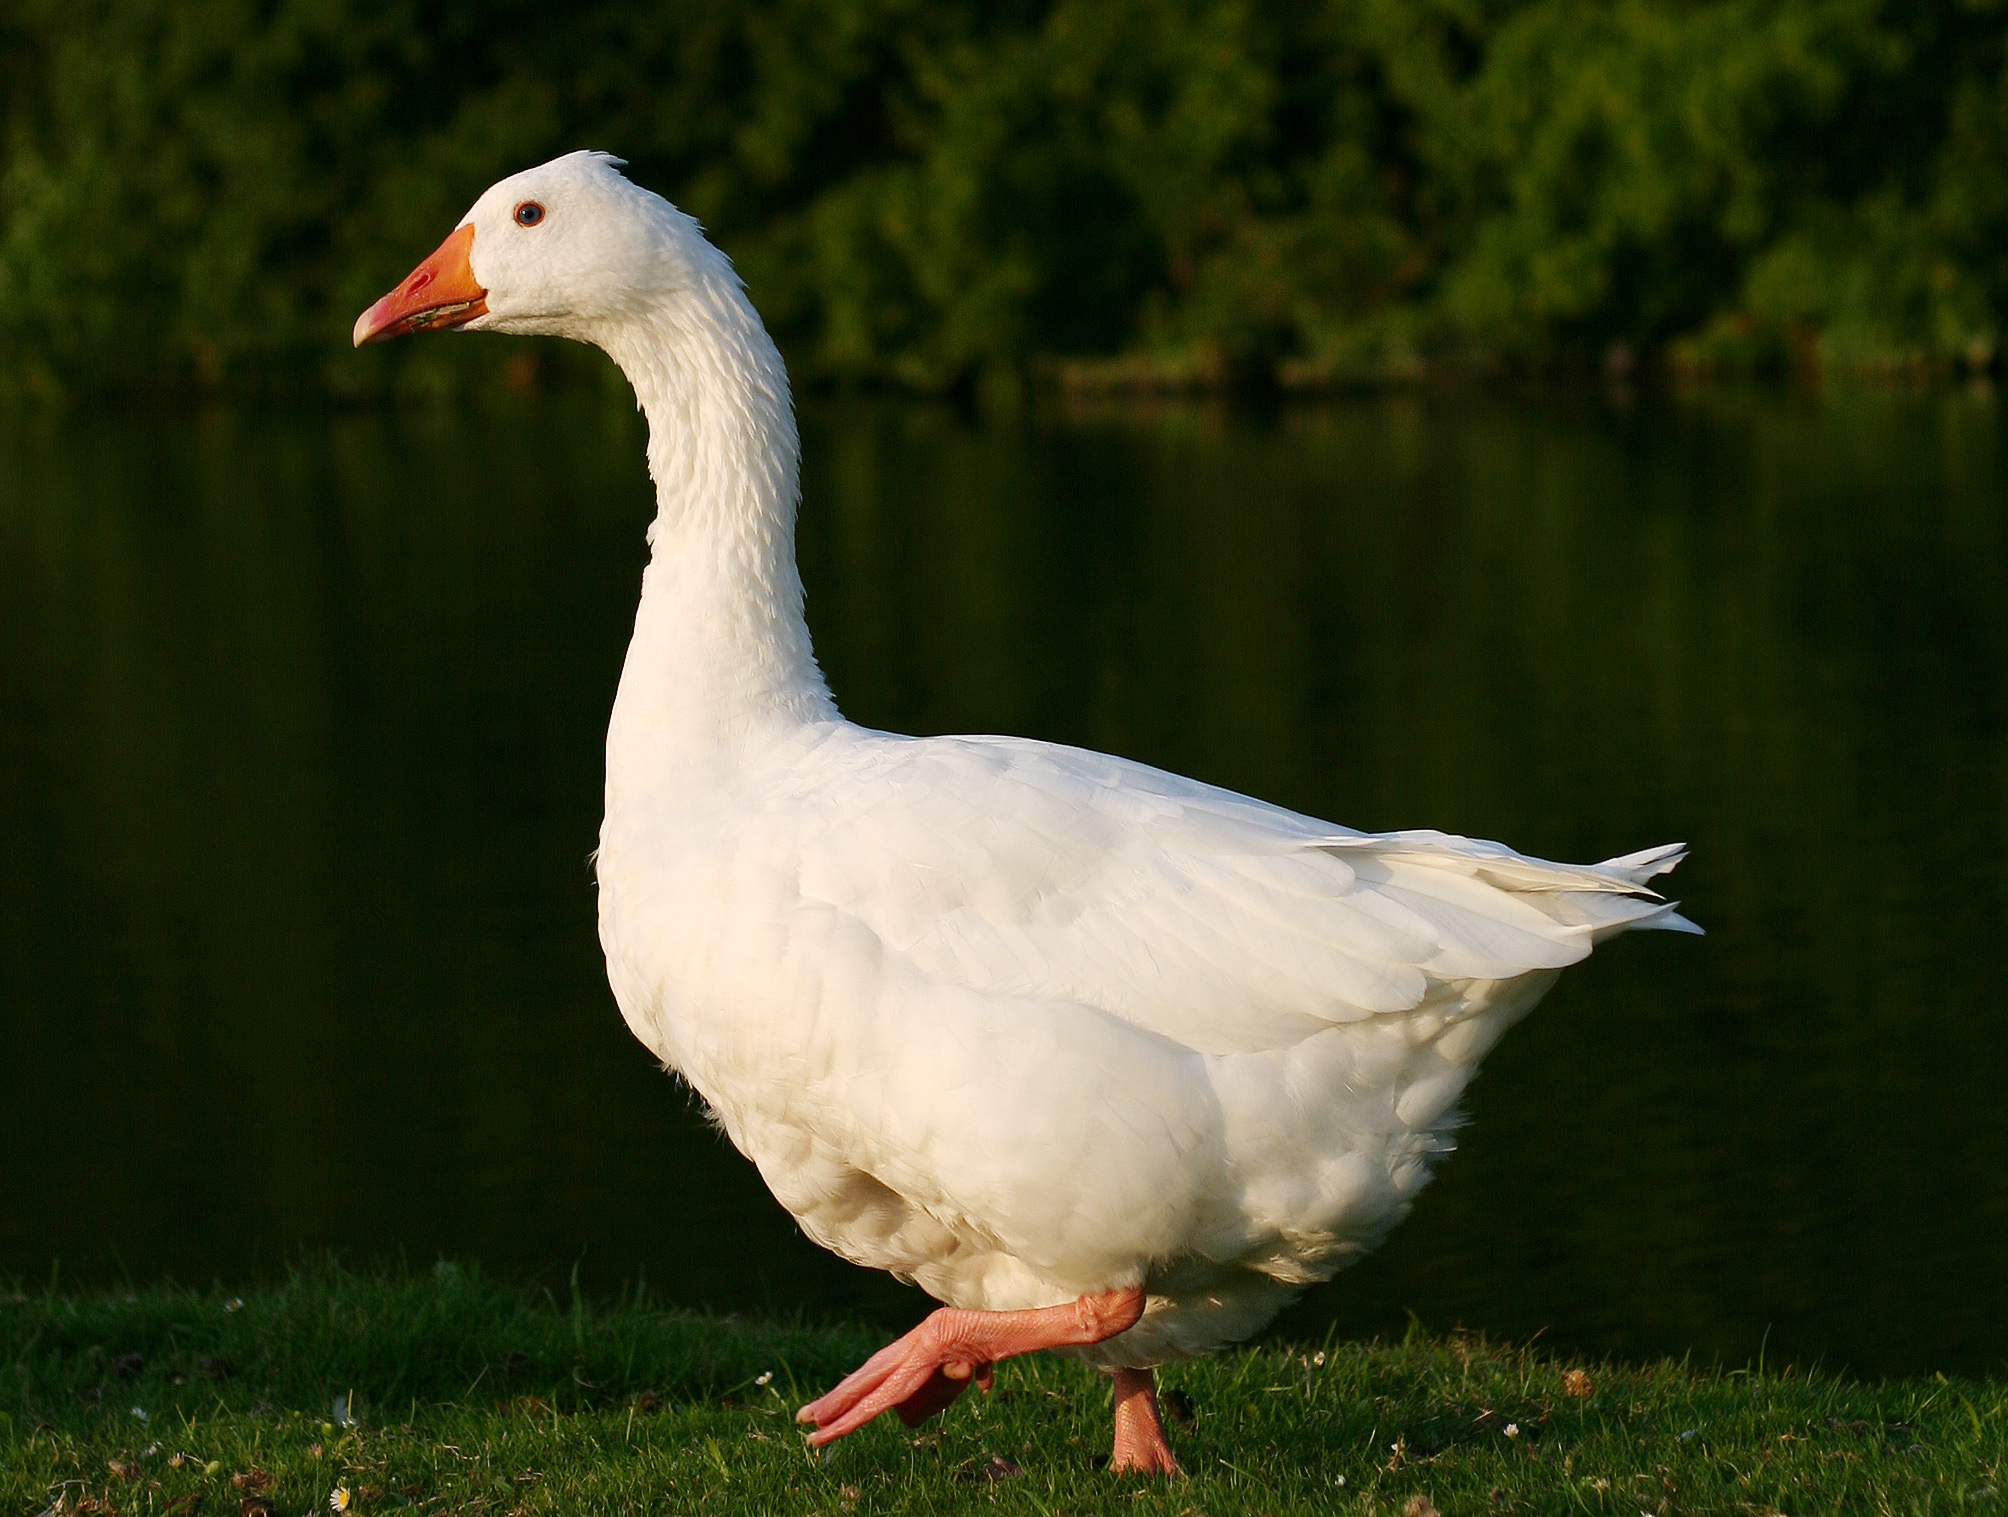 On the Subject of Nature: Snow Goose in the Athens!